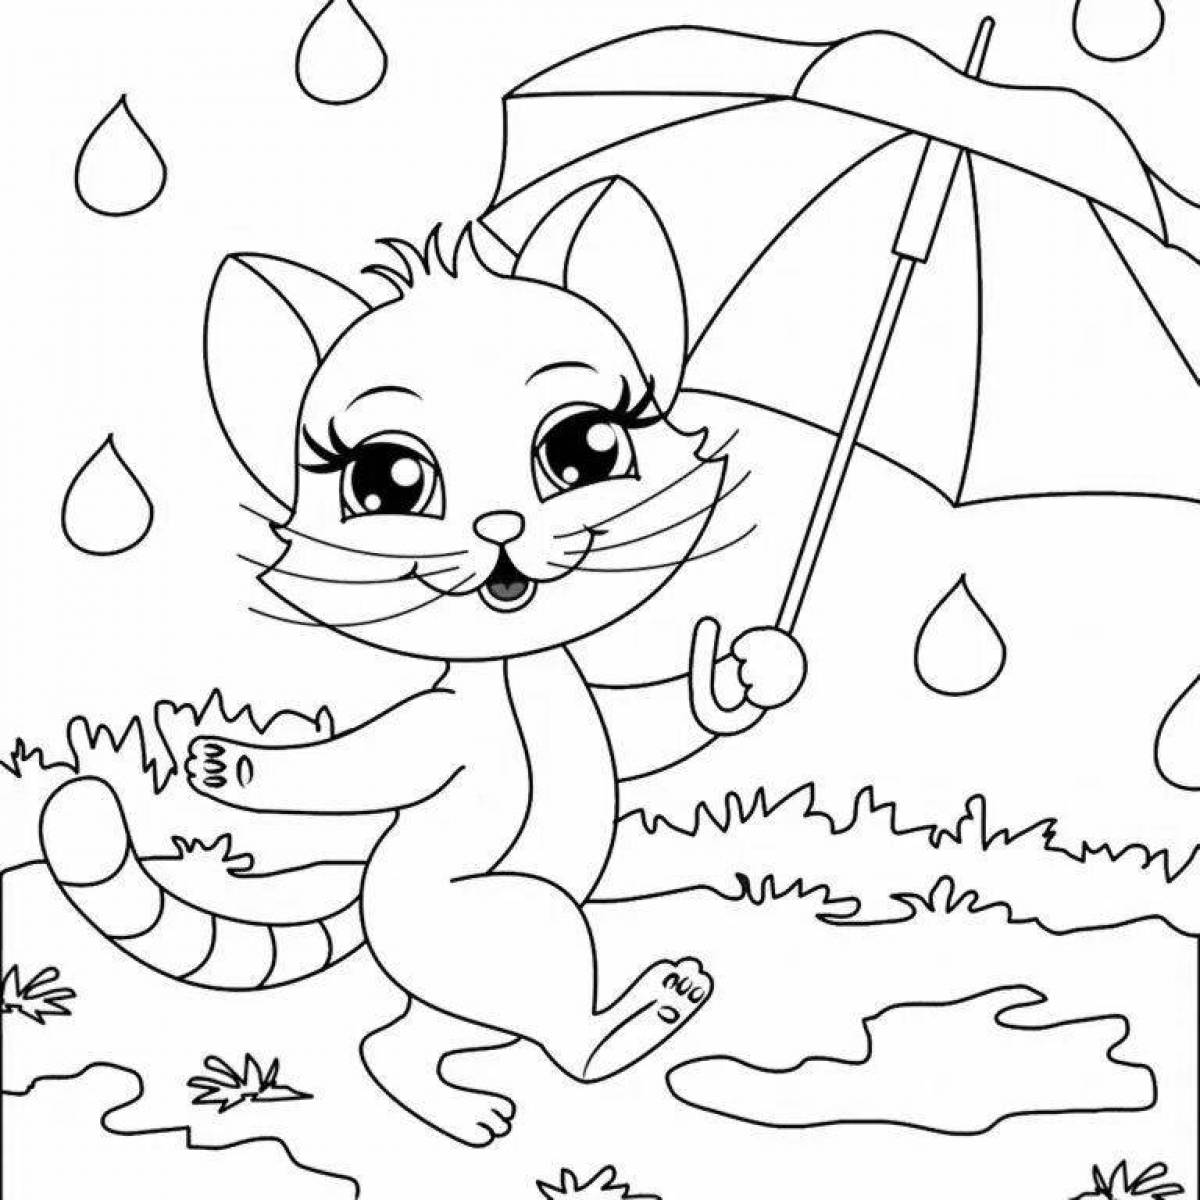 Glitter angela kitty coloring book